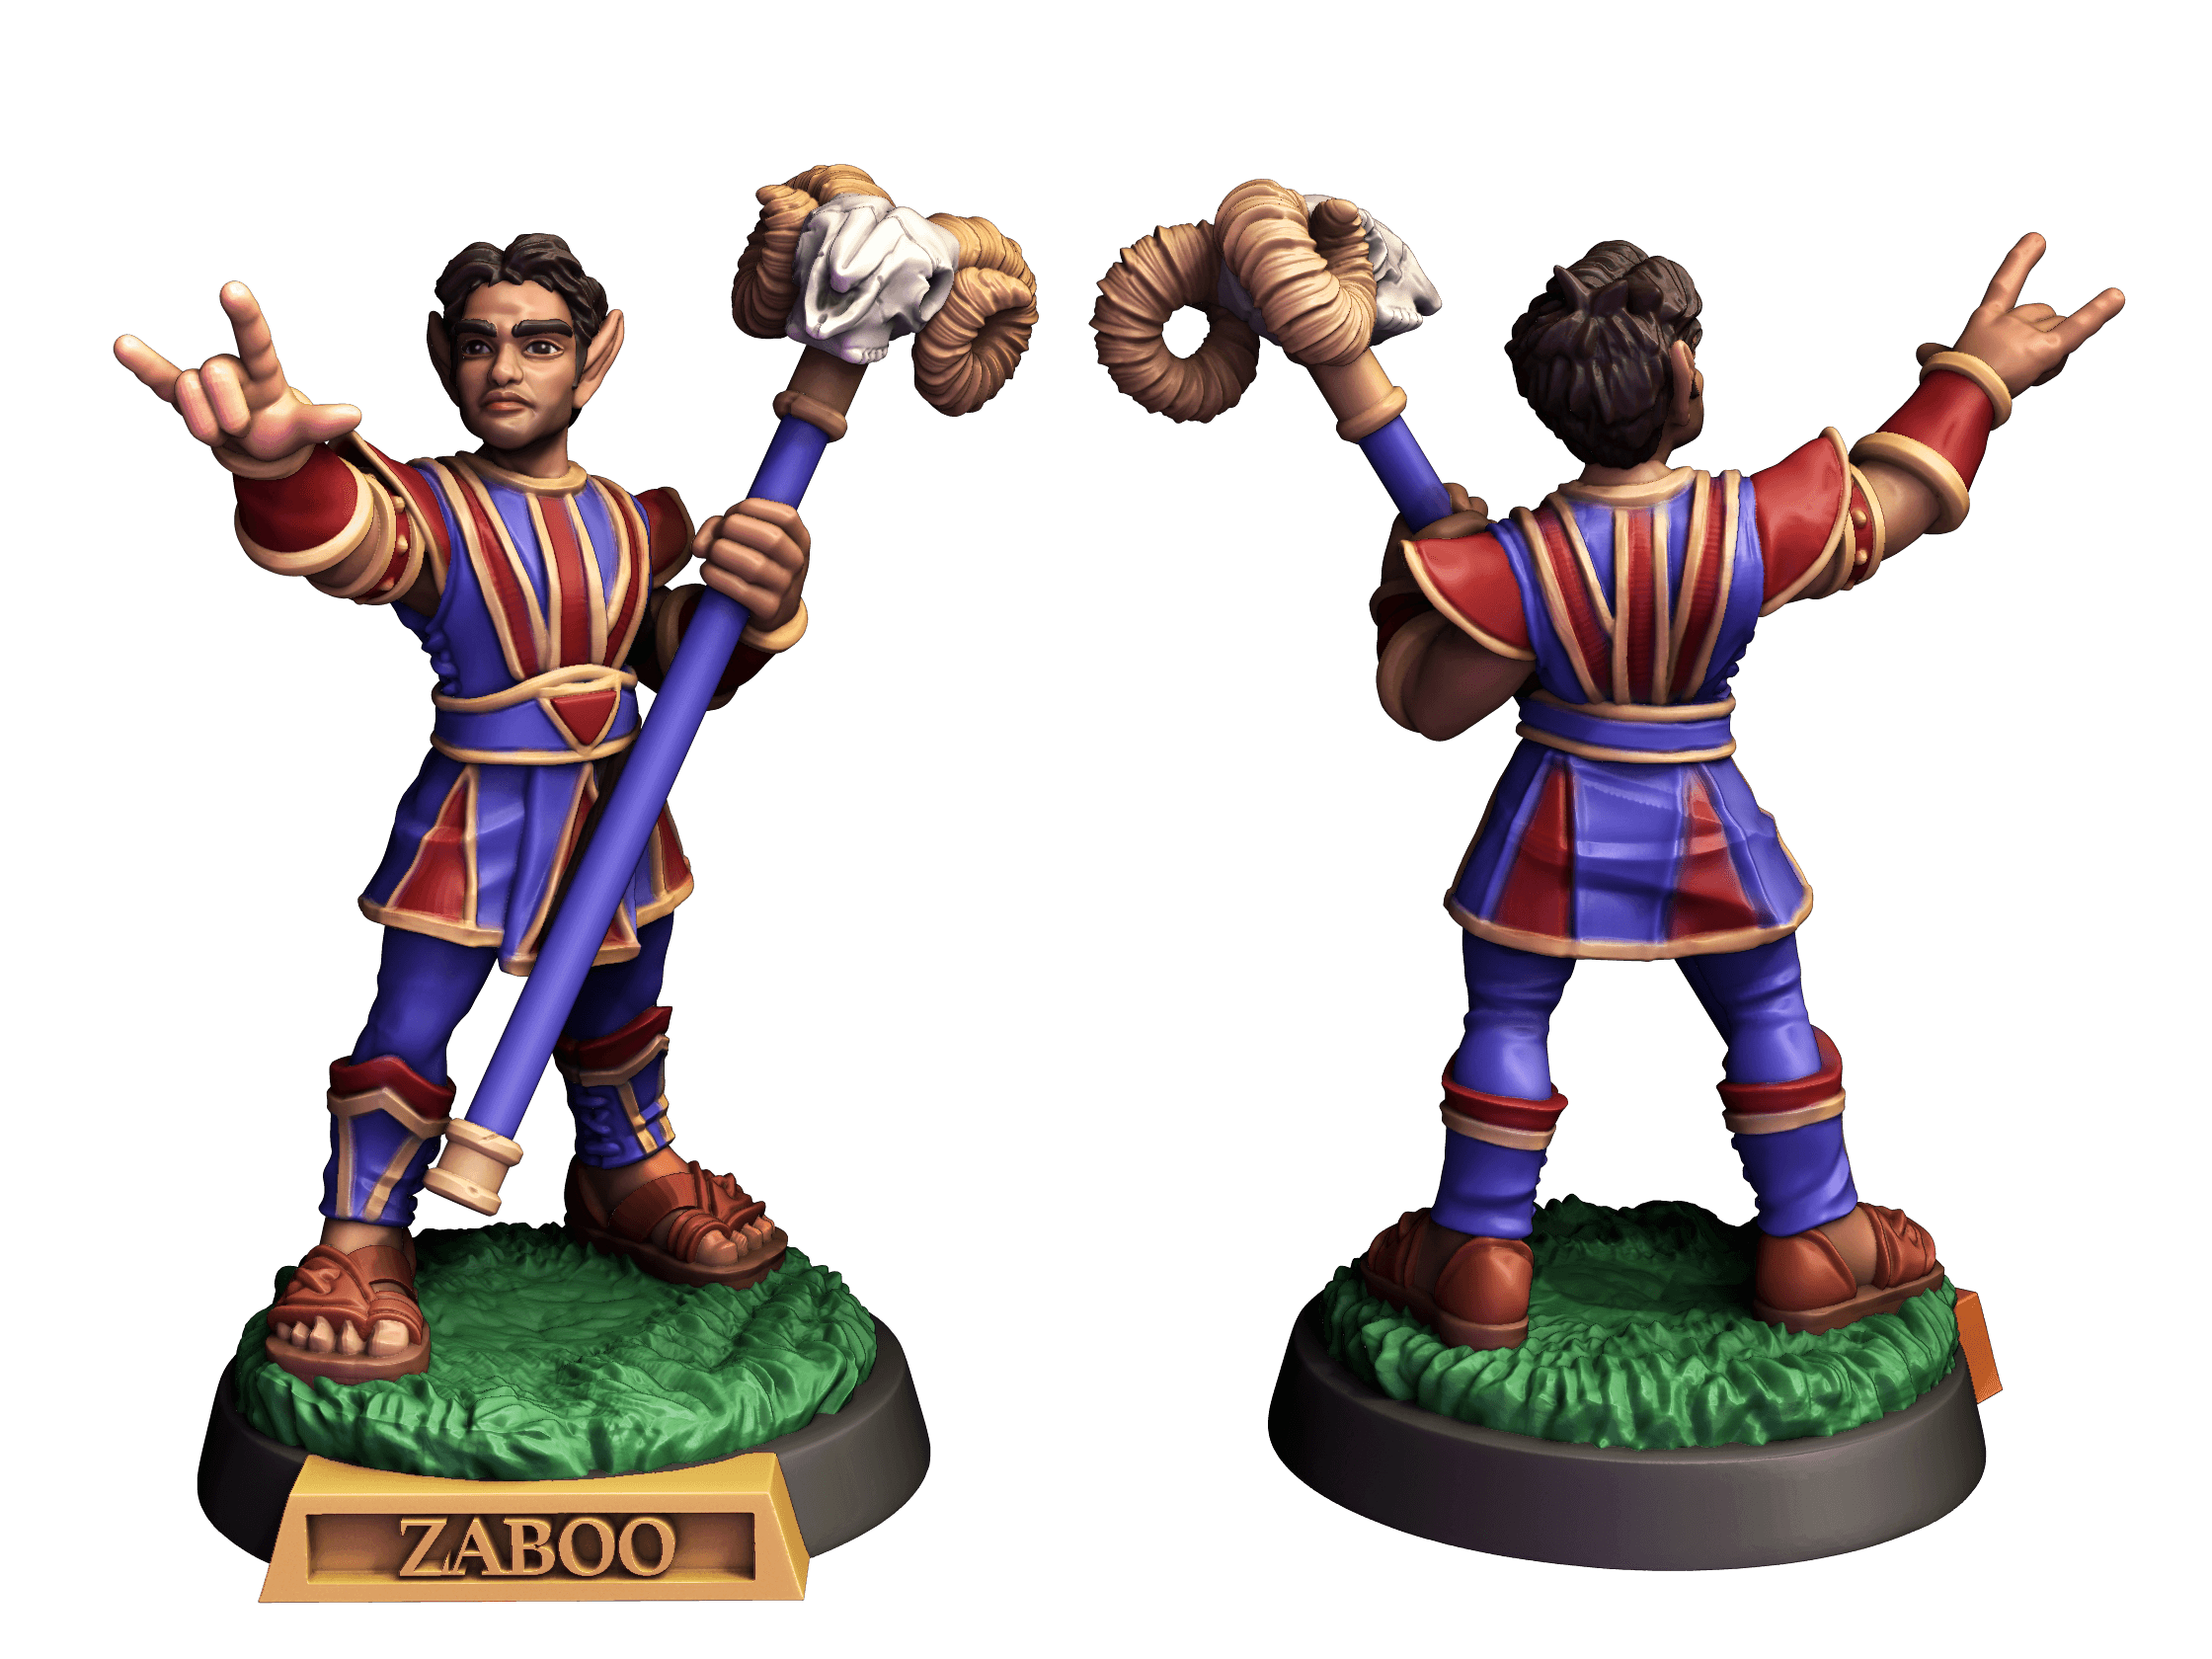 Zaboo from "The Guild" 3d model